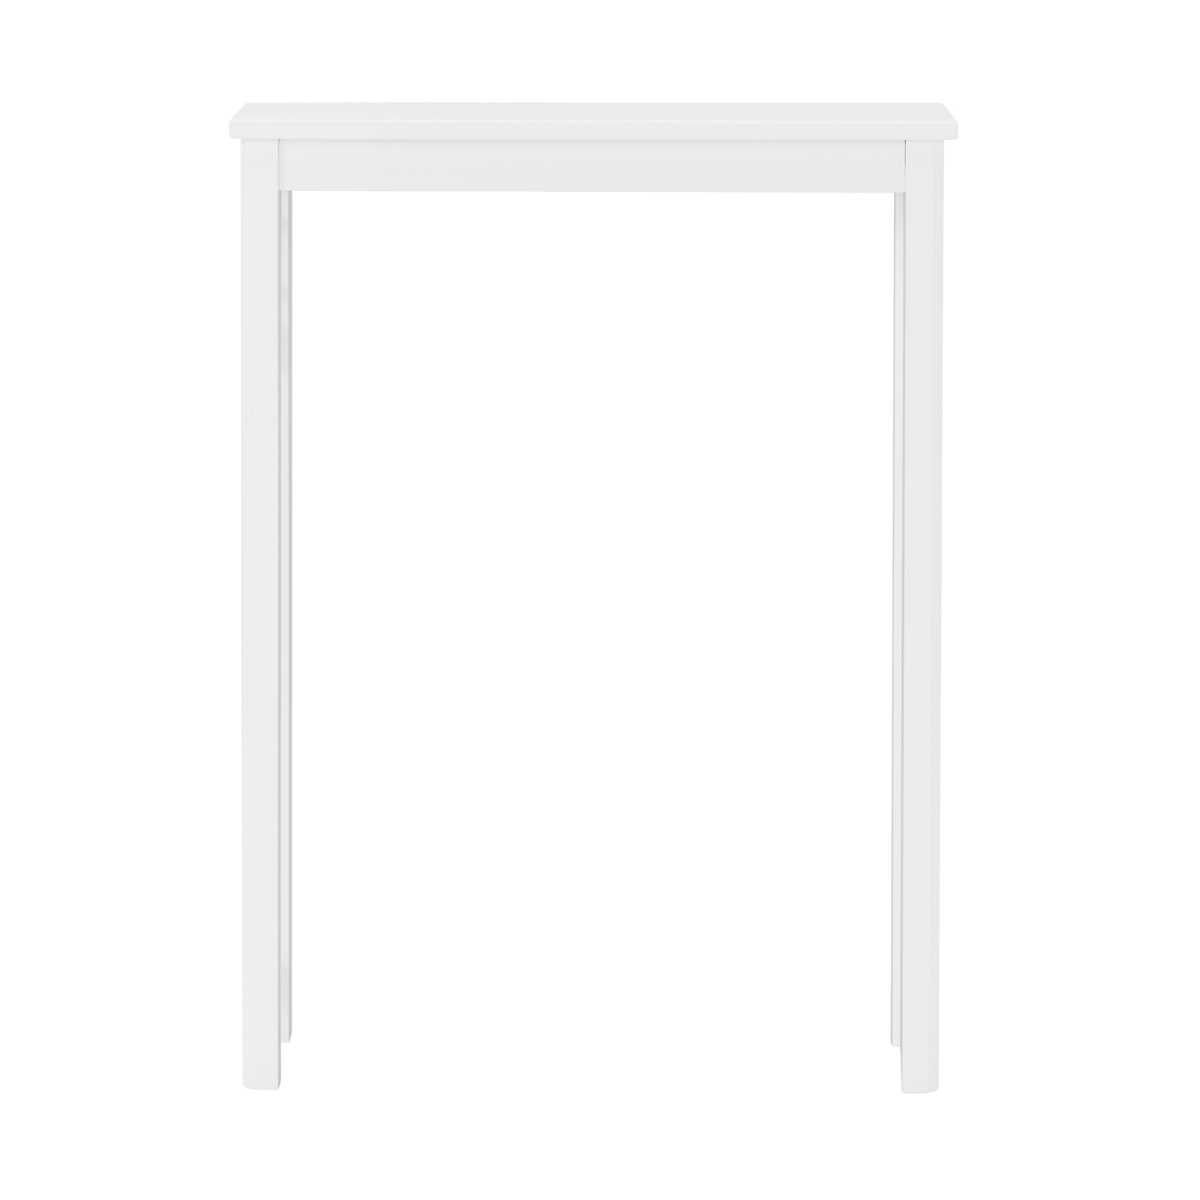 Picture of Alaterre ANDE72WH 27 x 37 in. Derby Over Toilet Shelf